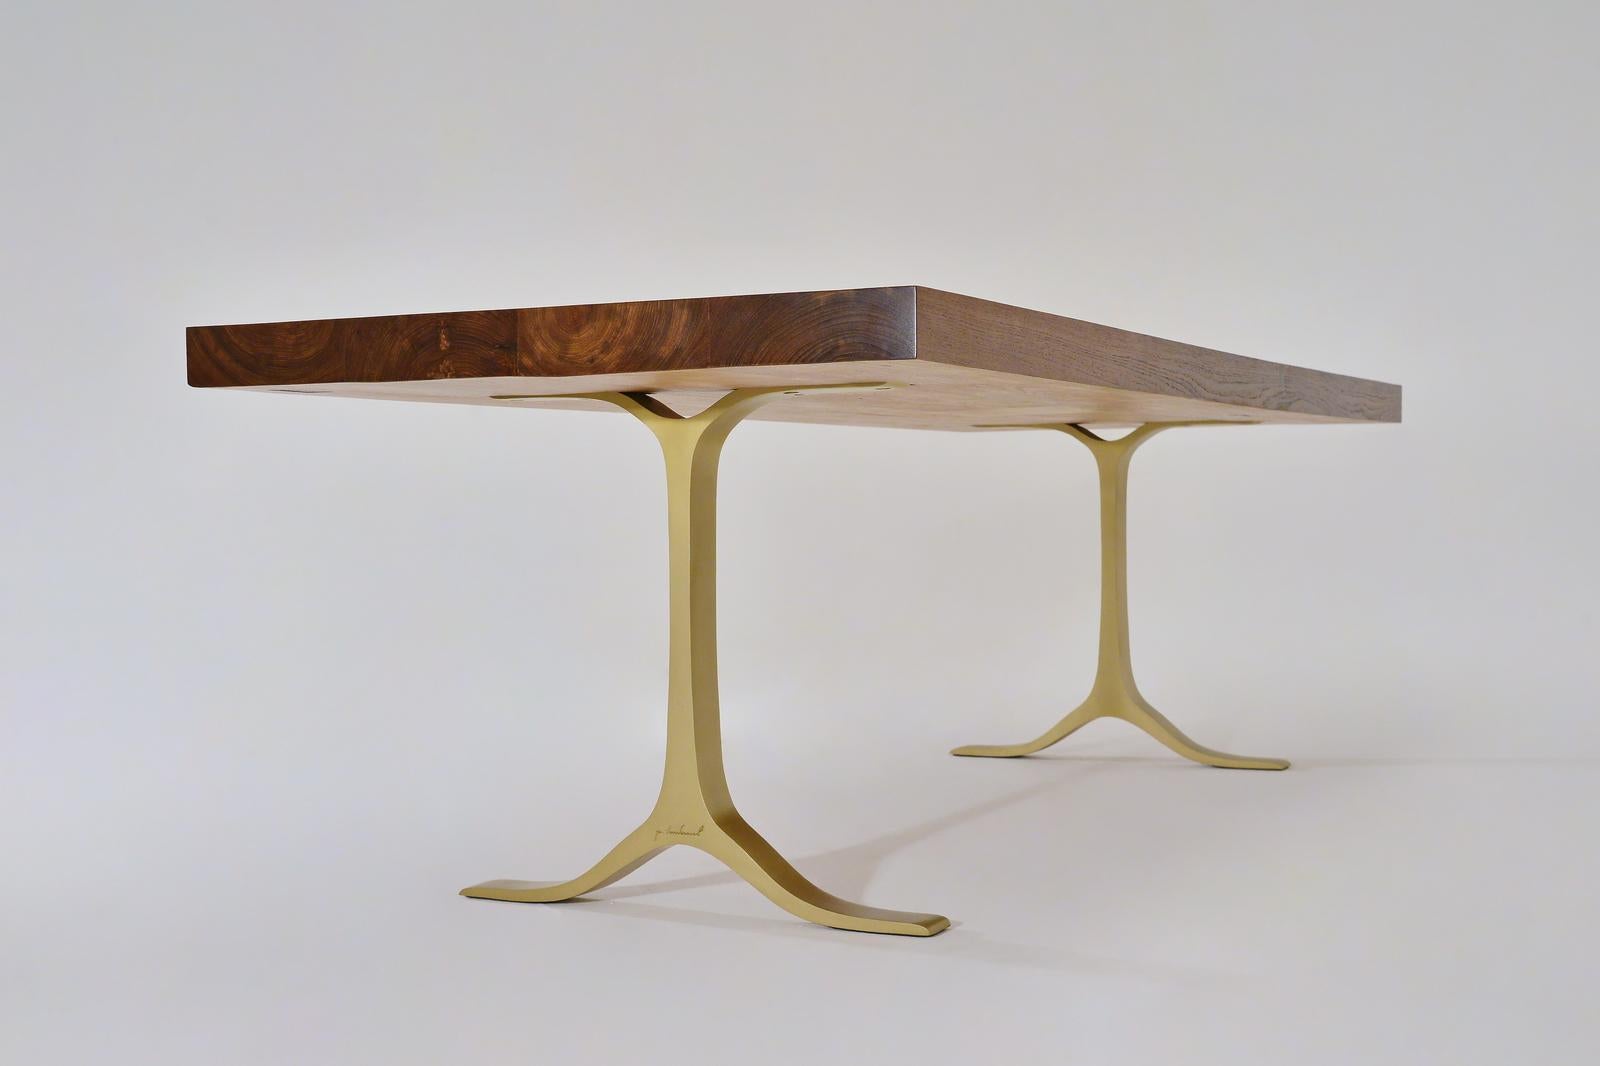 Thai Reclaimed Hardwood Table, Sand Cast Brass Base by P. Tendercool For Sale